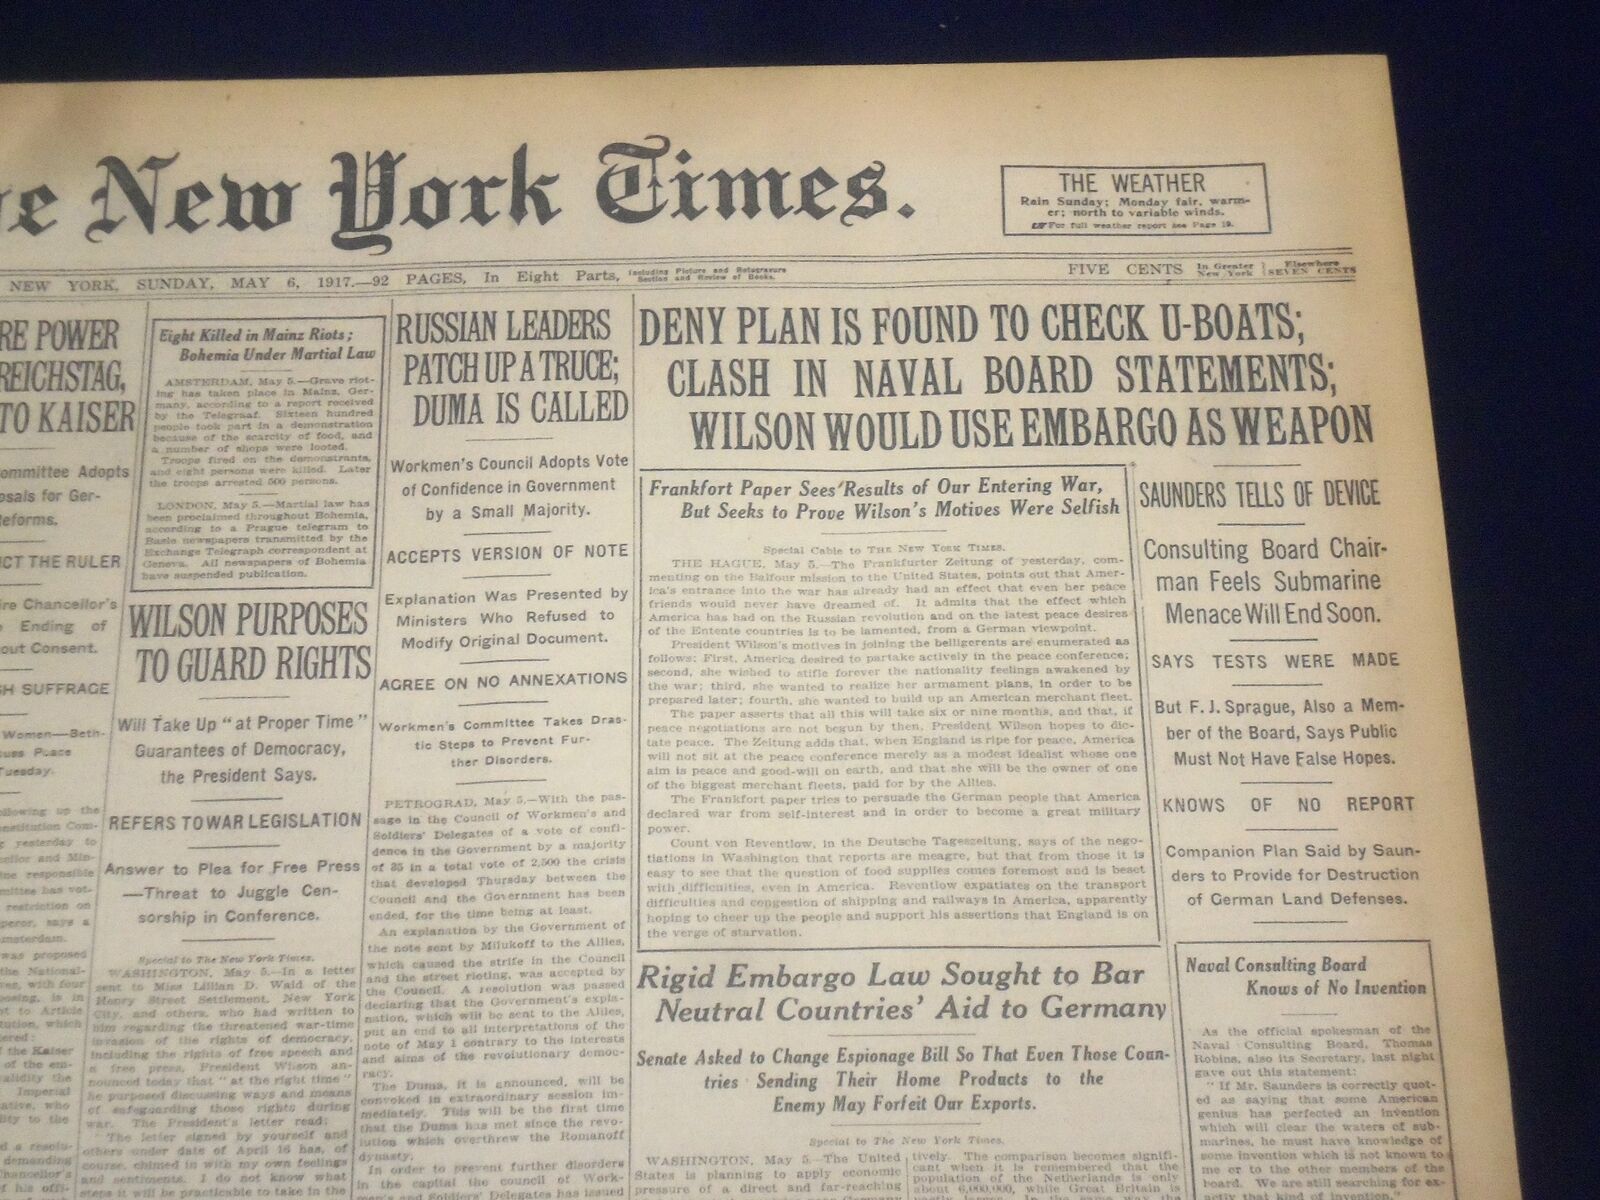 1917 MAY 6 NEW YORK TIMES - DENY PLAN FOUND TO CHECK U-BOATS - NT 9135